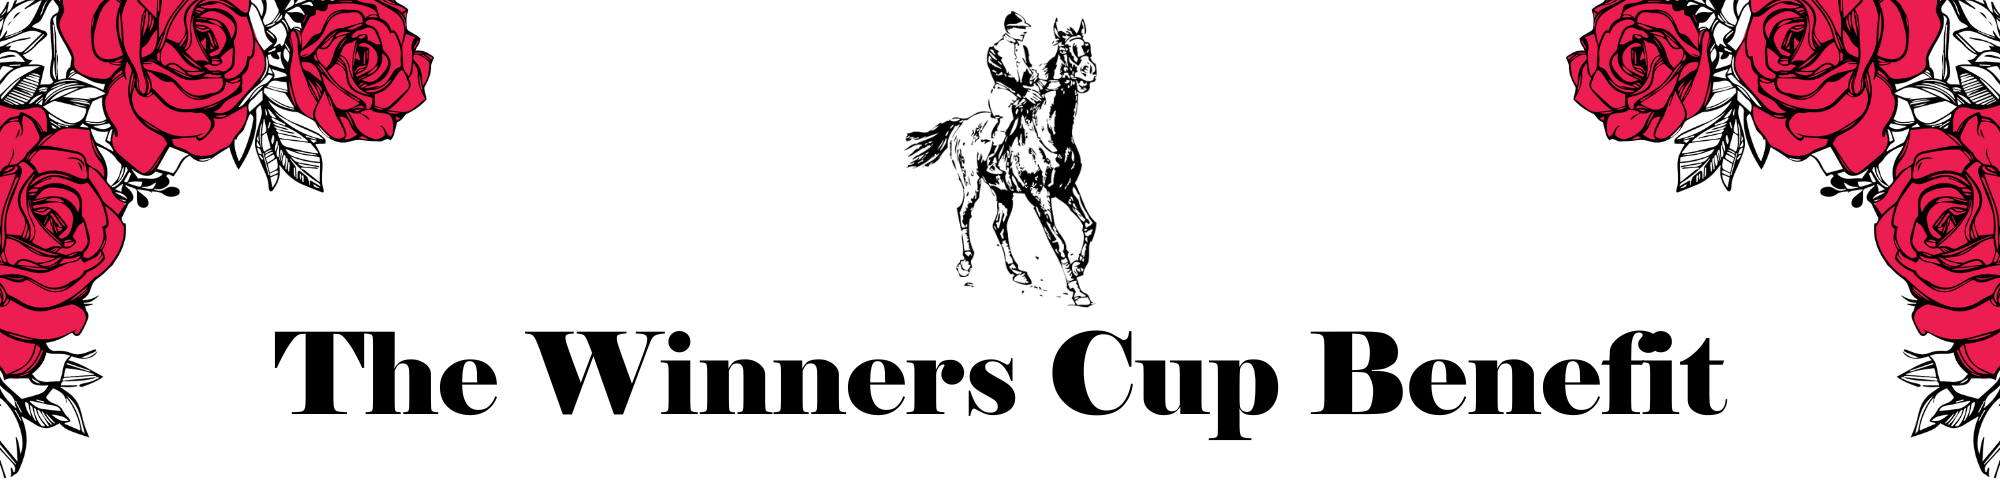 Winners Cup Banner (1)